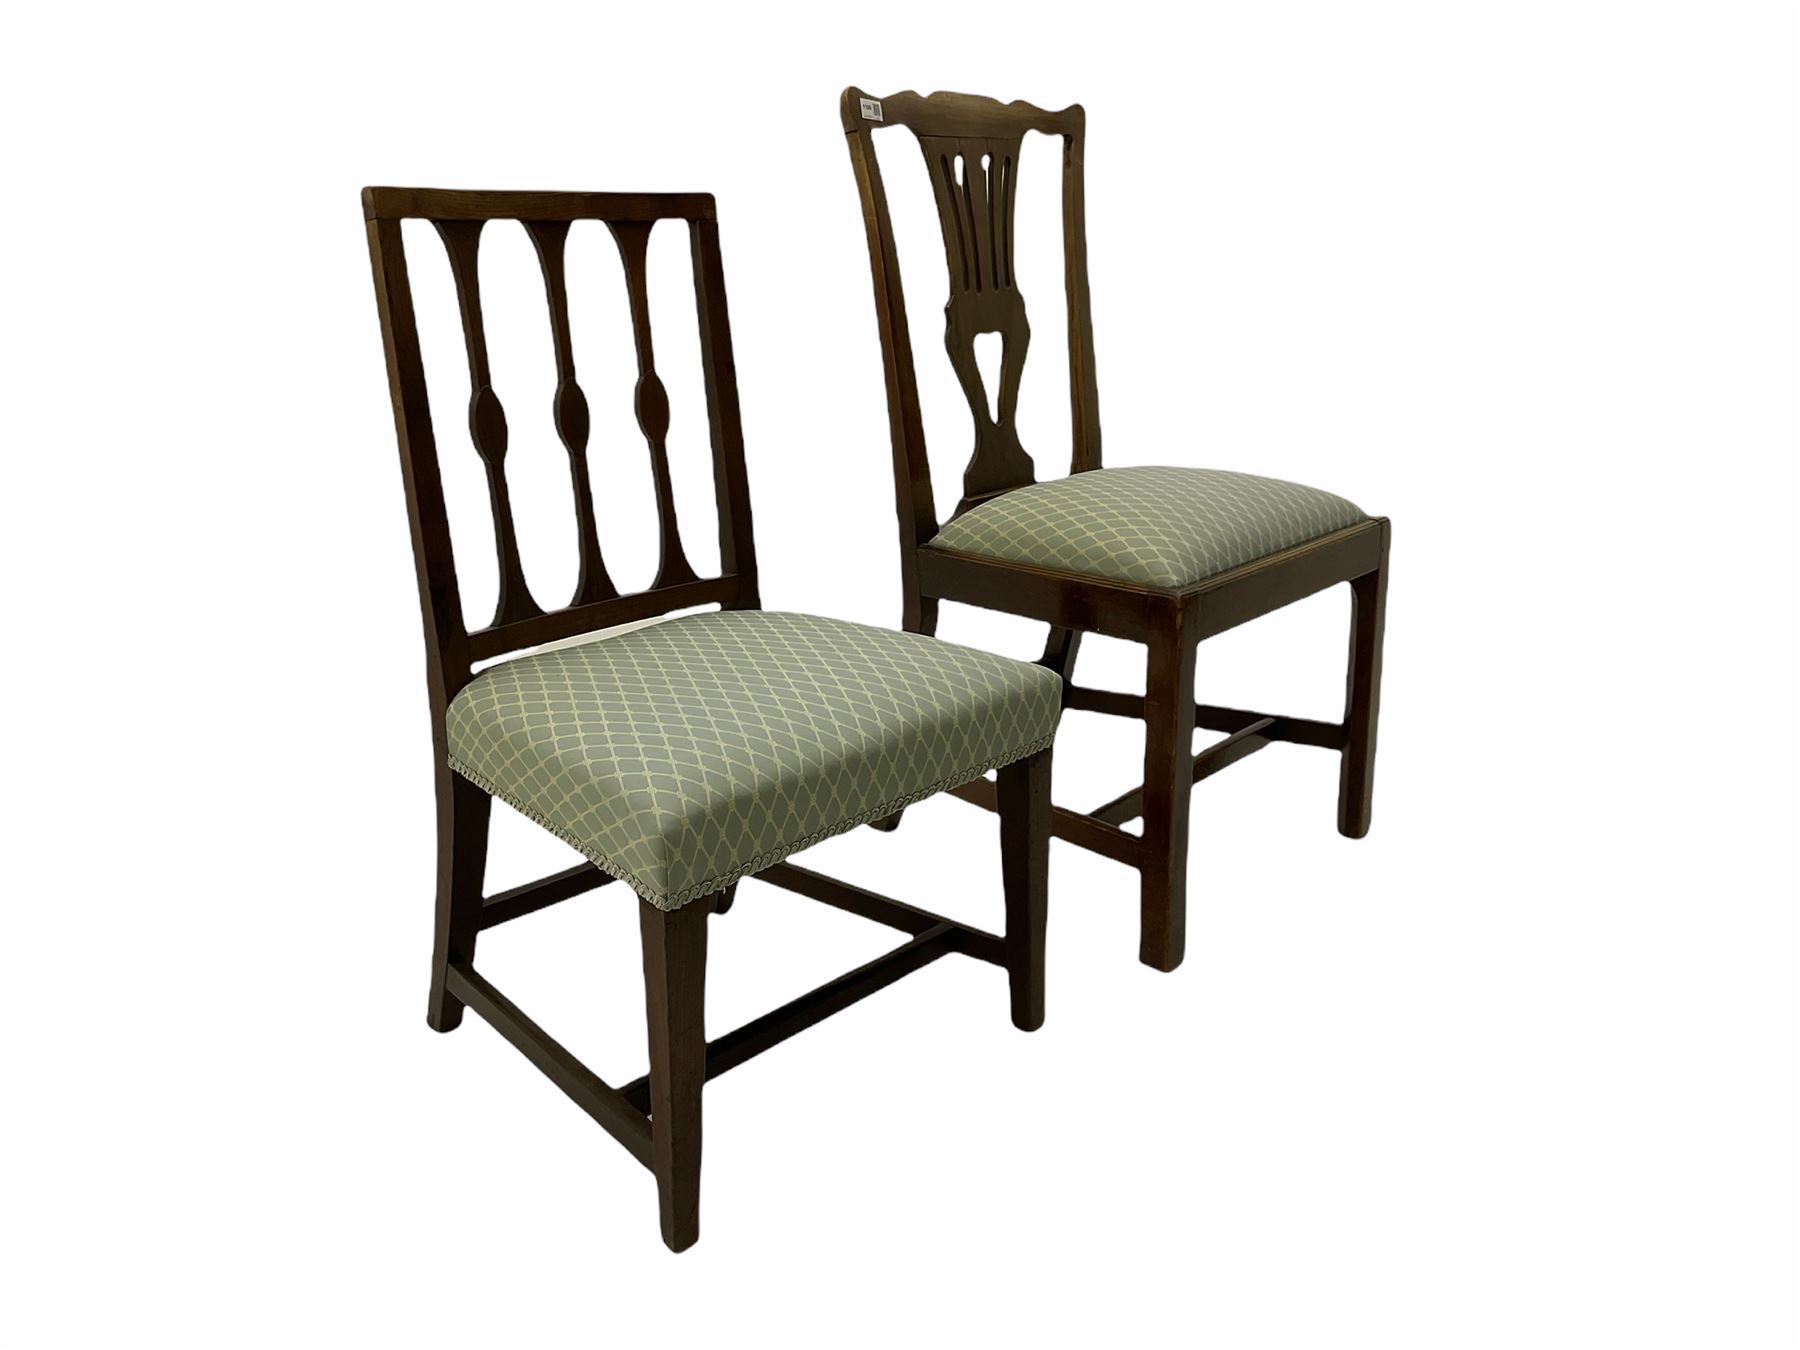 Two 19th century chairs - Image 3 of 4